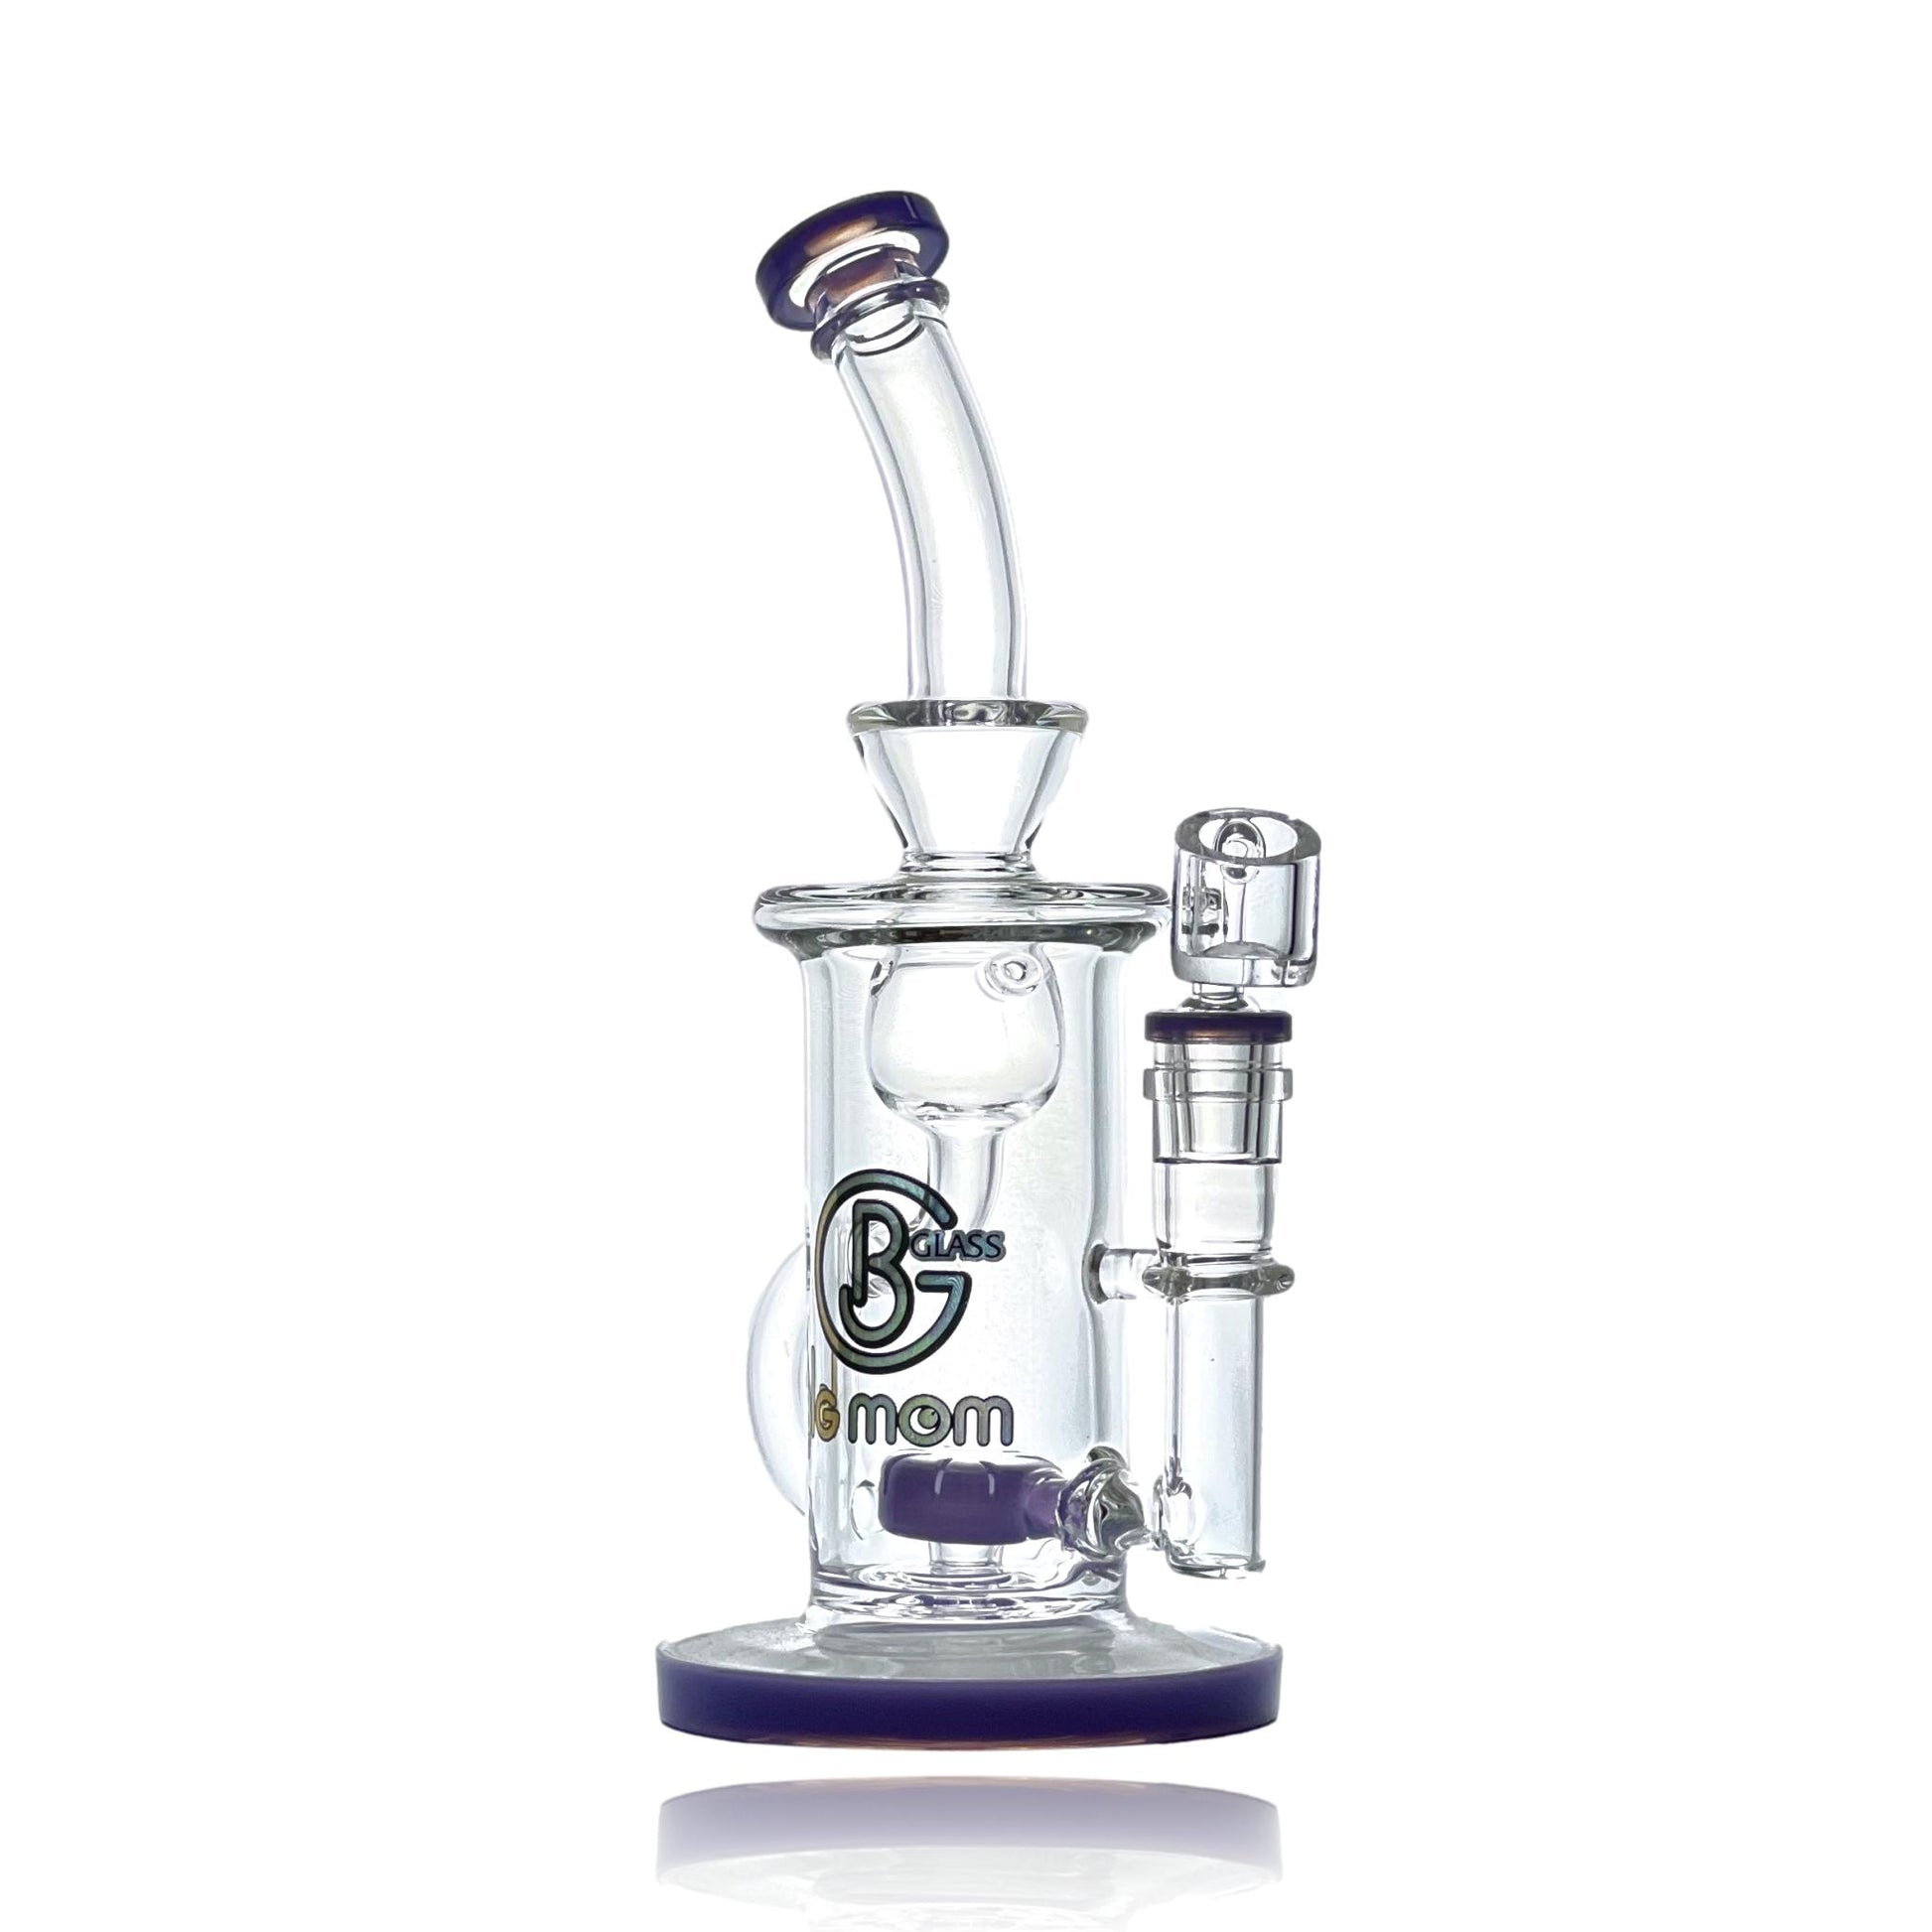 The Encore Color Showerhead Dab Rig is a high-quality, reasonably-priced dab rig that has a relatively small body and a beautifully colored showerhead percolator. The bent neck and widened lip of this piece make it easy to use and help to reduce splashback. The broad flat base and thick main chamber provide increased stability and durability. This pipe's compact size makes it the ideal option for your daily dab sesh, whether it be at home or on the go! 